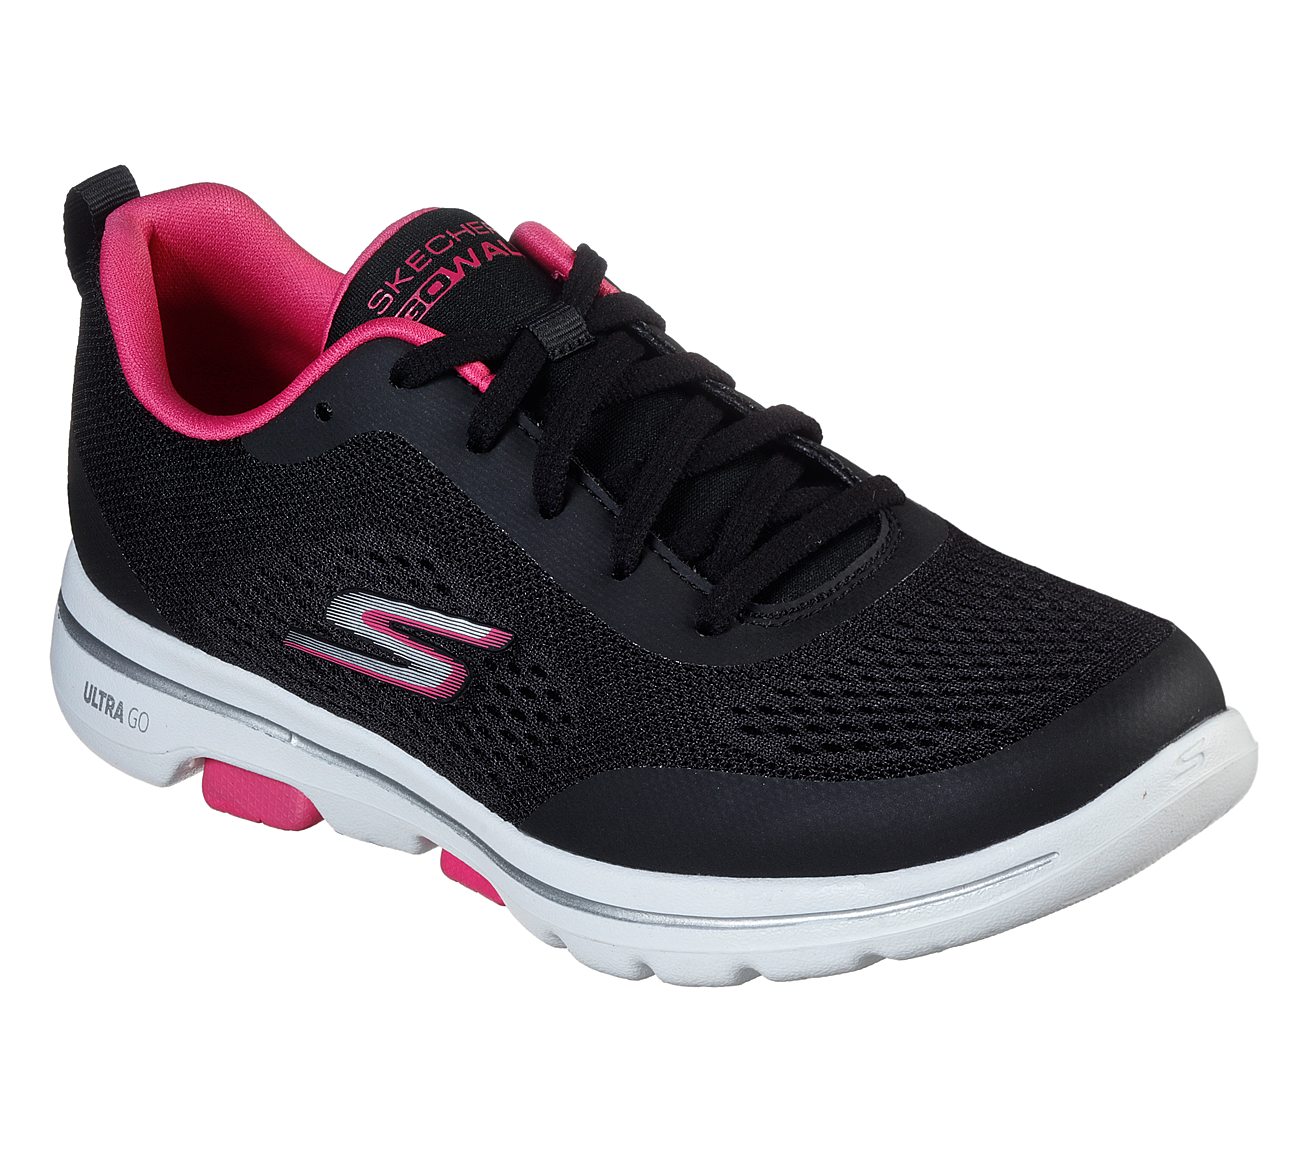 GO WALK 5 - EXQUISITE, BLACK/PINK Footwear Lateral View